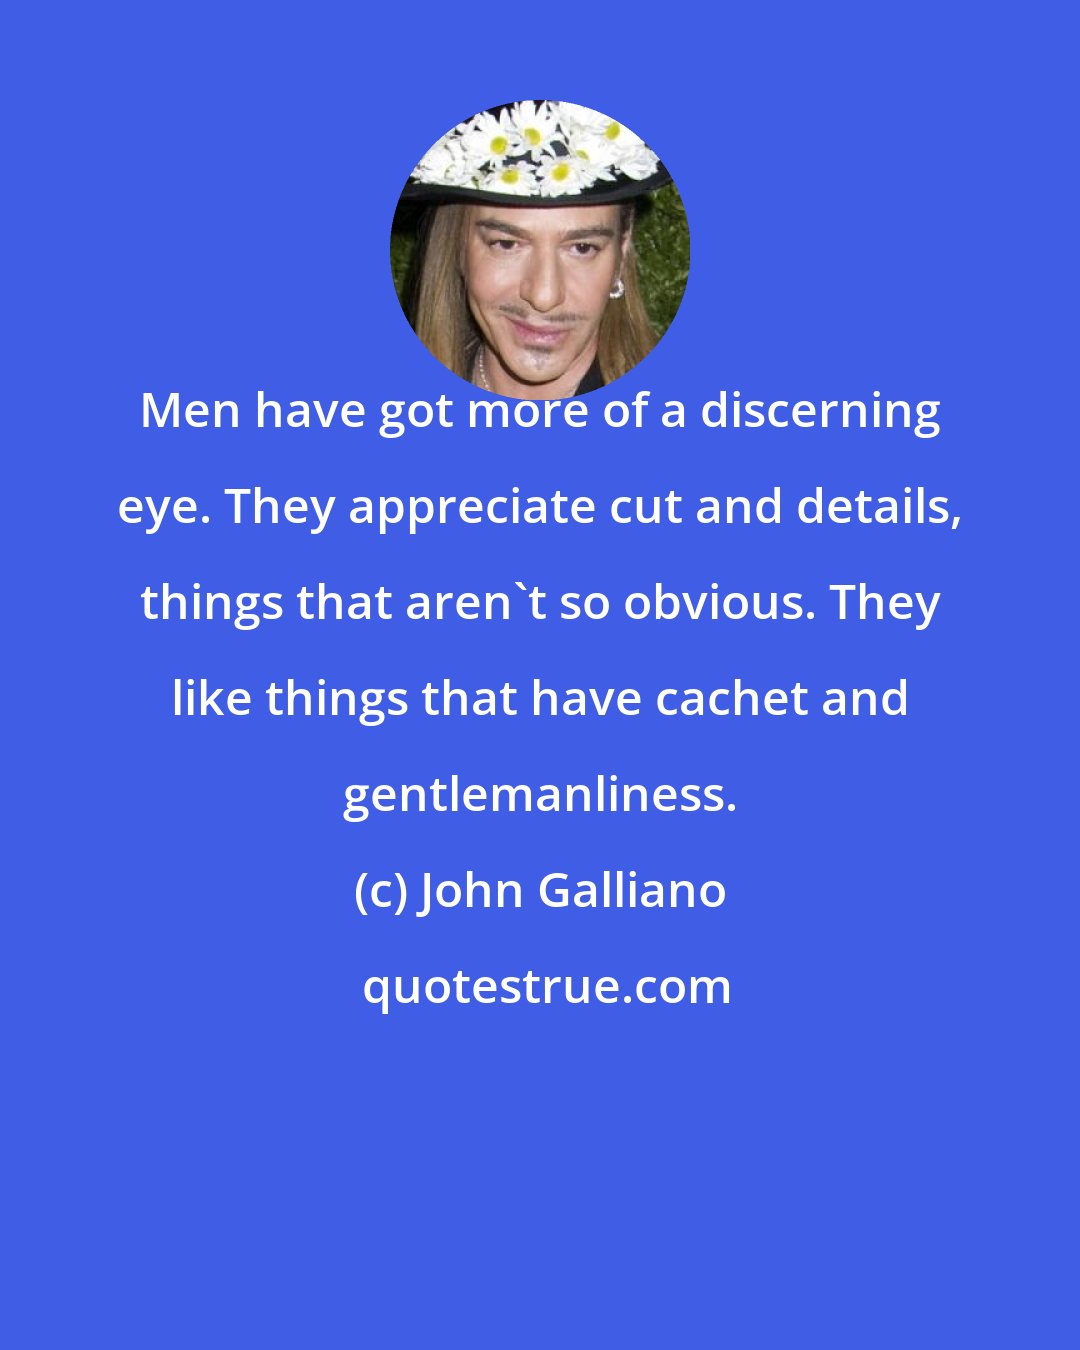 John Galliano: Men have got more of a discerning eye. They appreciate cut and details, things that aren't so obvious. They like things that have cachet and gentlemanliness.